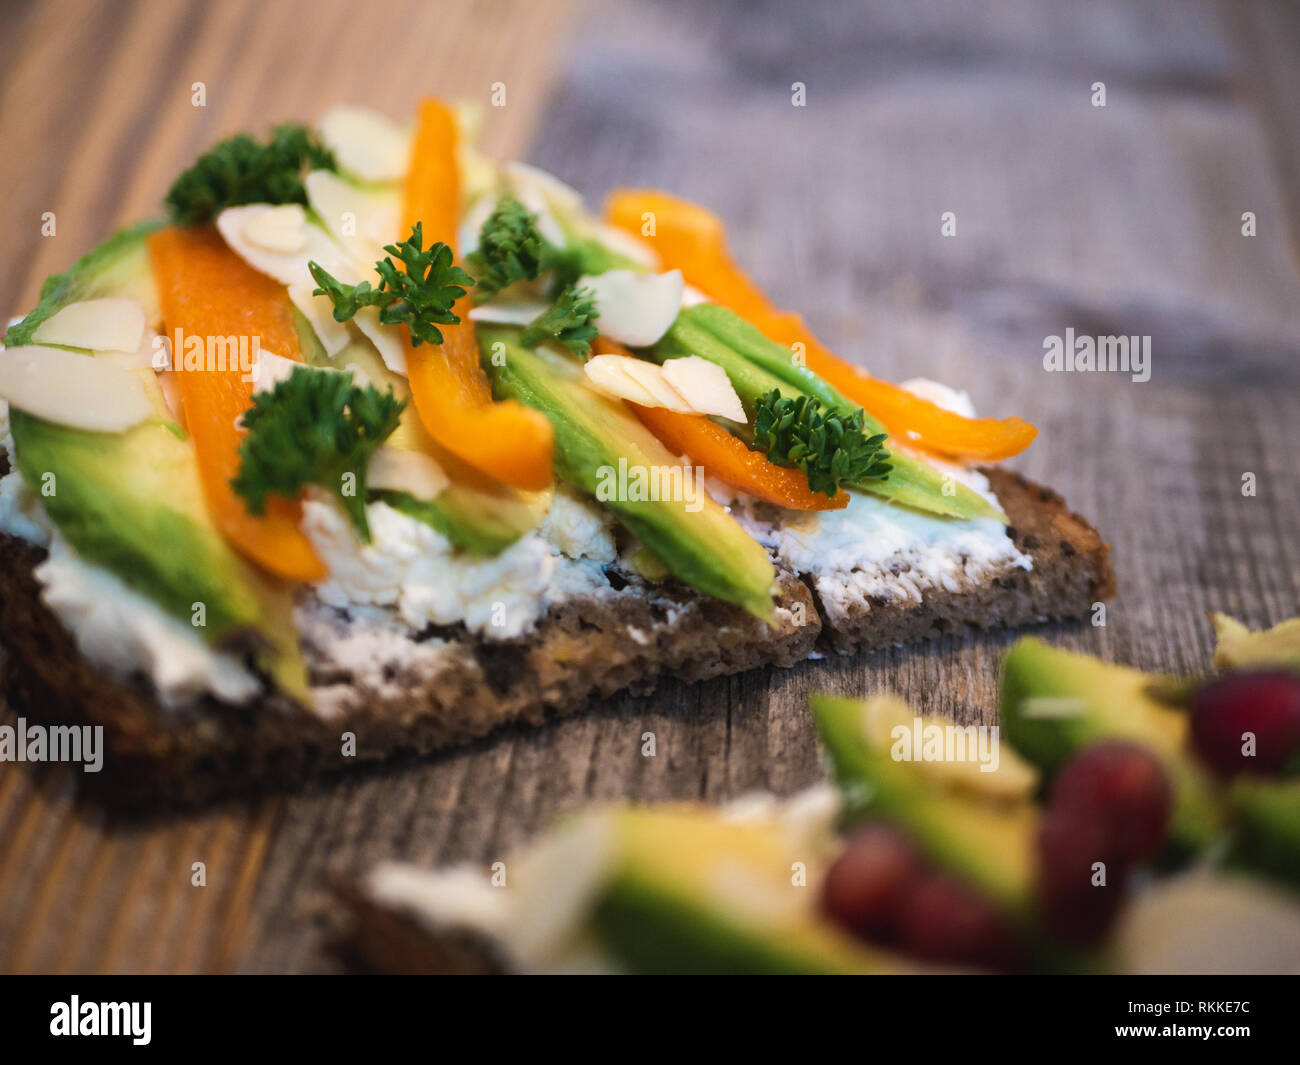 Delicious and healthy avocado toast with pomegranate, bell pepper and almond on rustic wooden board Stock Photo